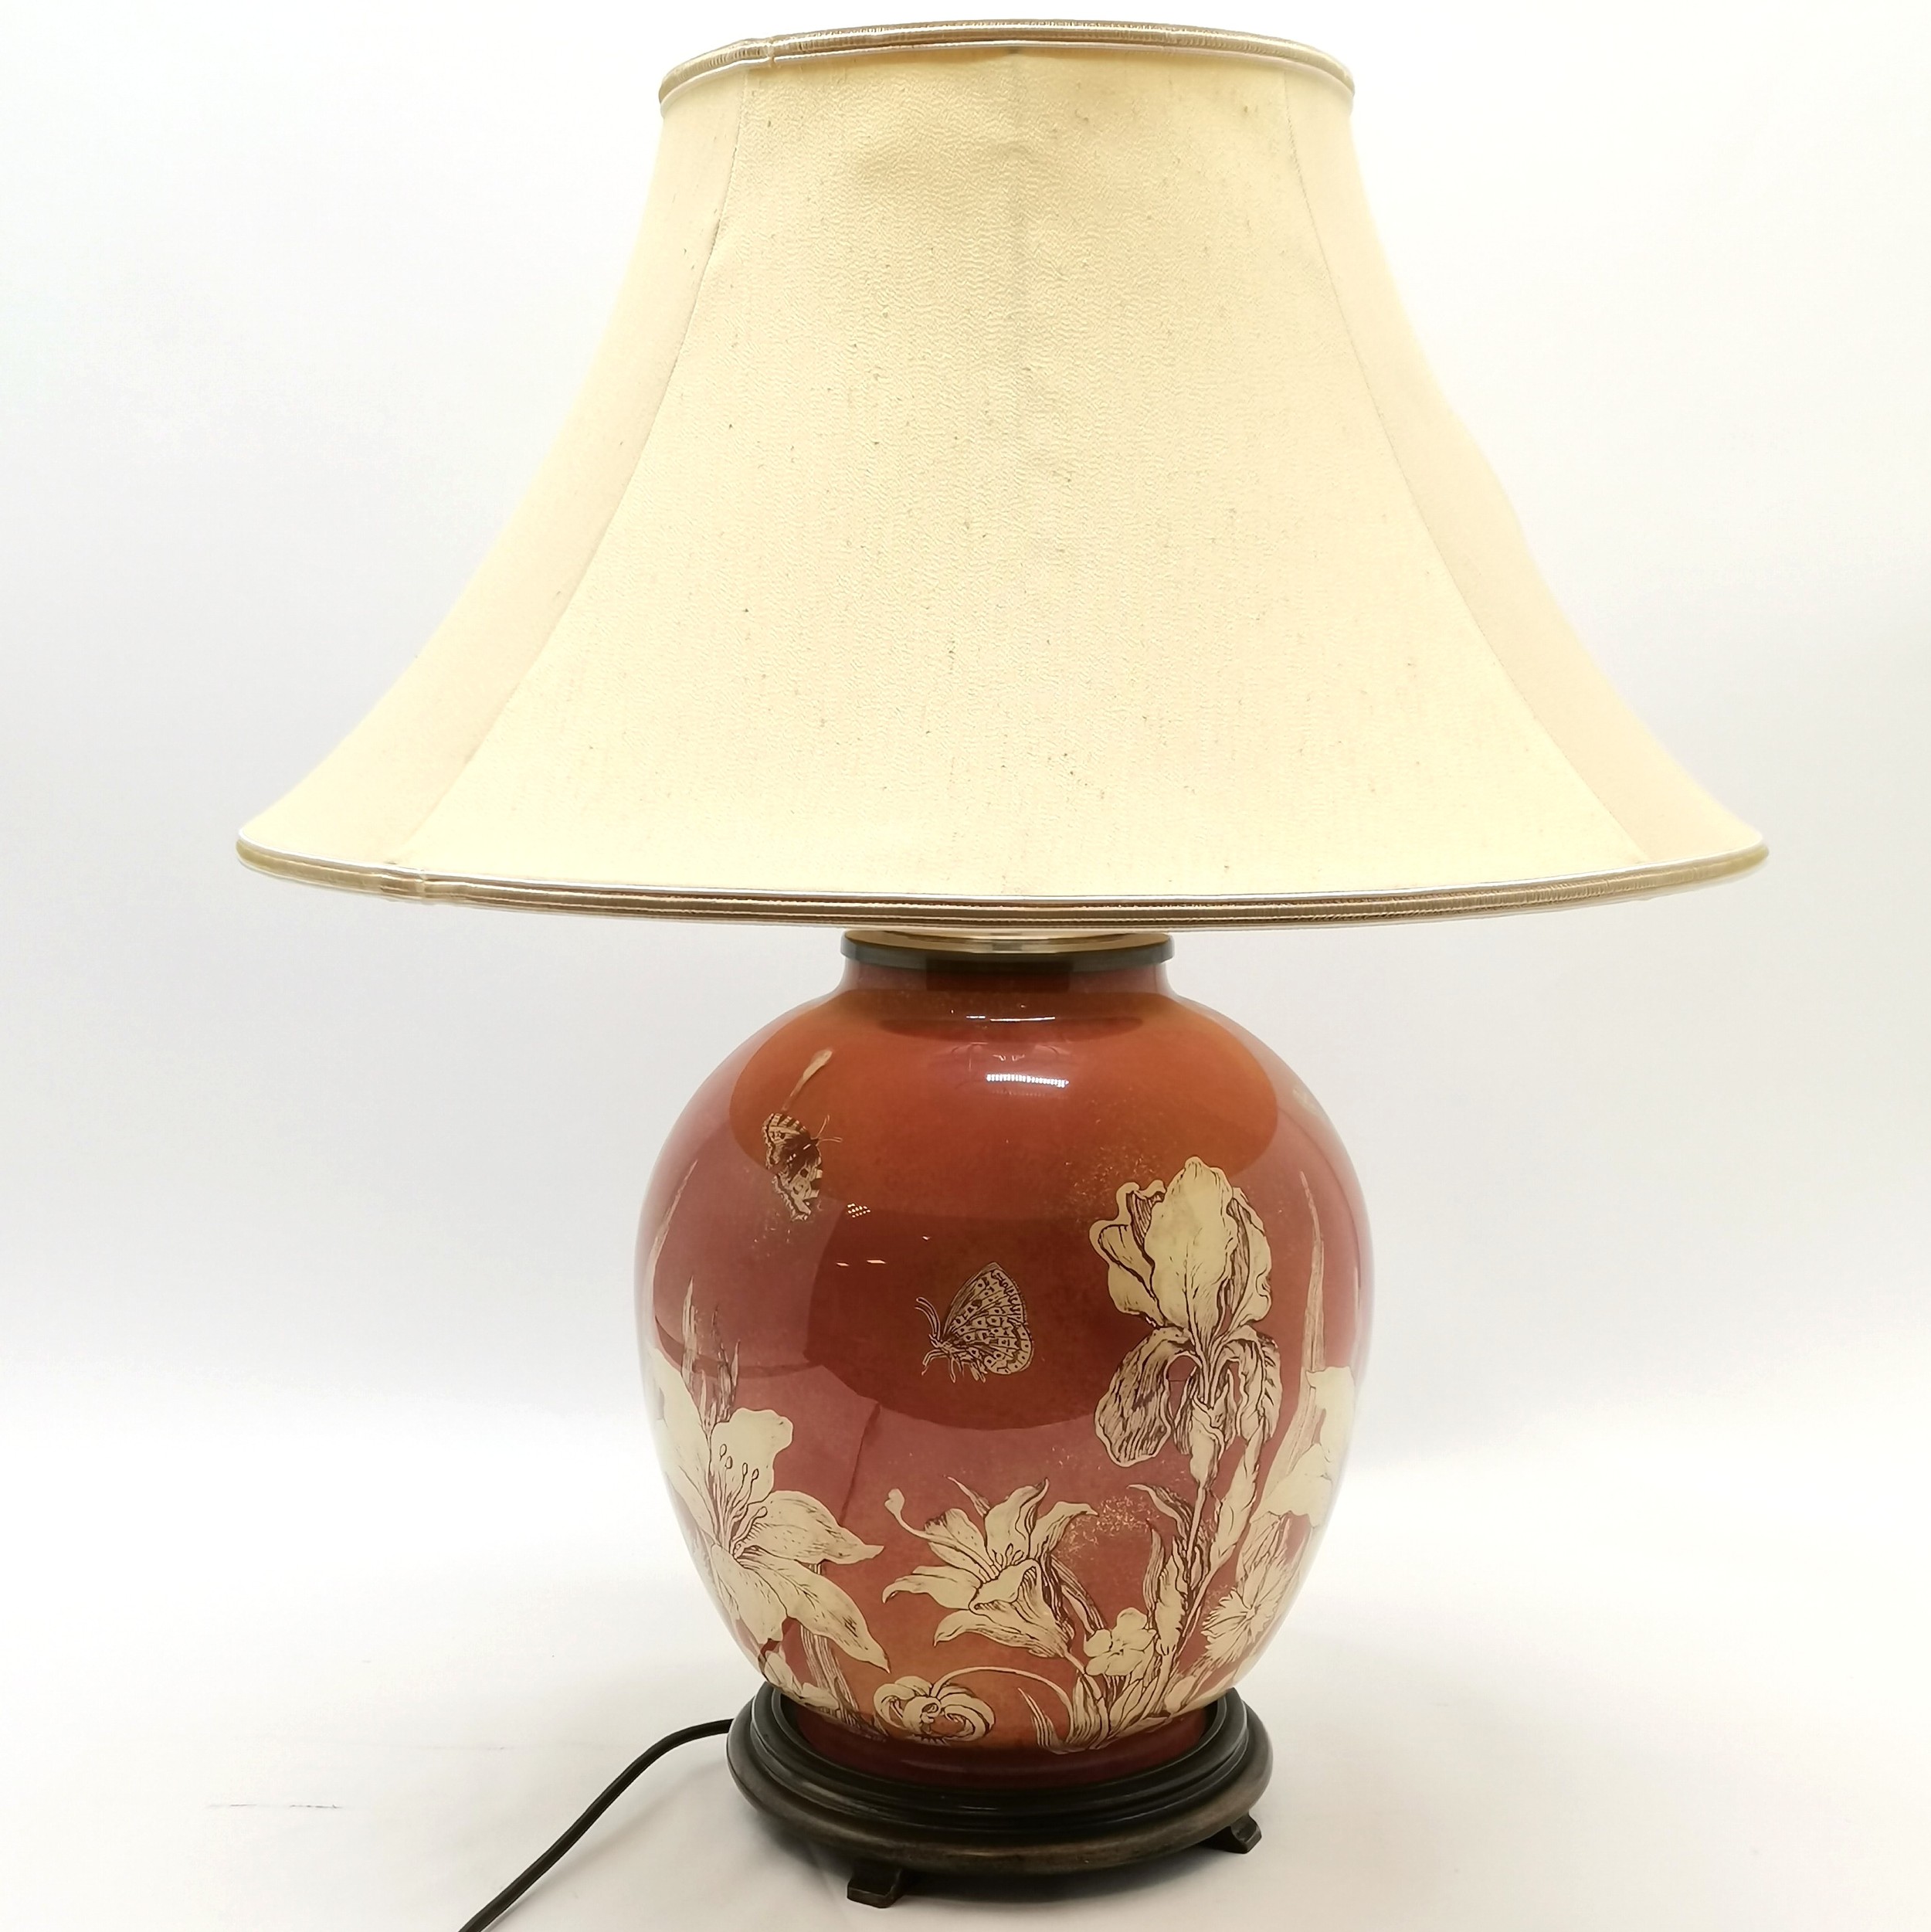 Contemporary floral decorated rust ground lamp complete with shade, lamp base, 44 cm high, good used